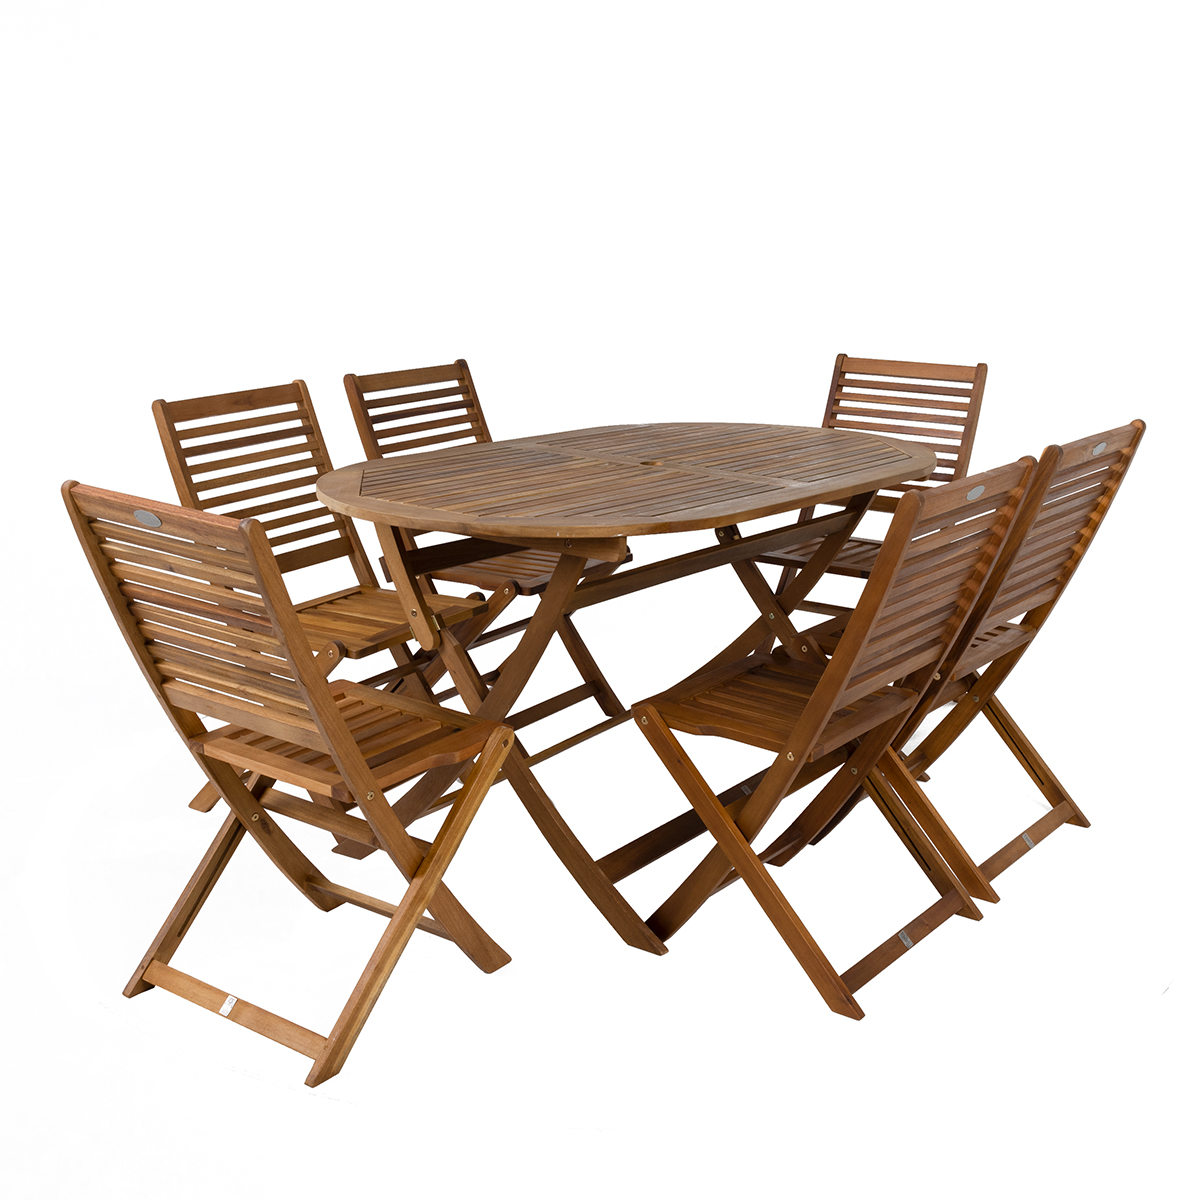 Charles Bentley Fsc Acacia Wooden Furniture Patio Oval Table 6 Chairs 7 Piece Set